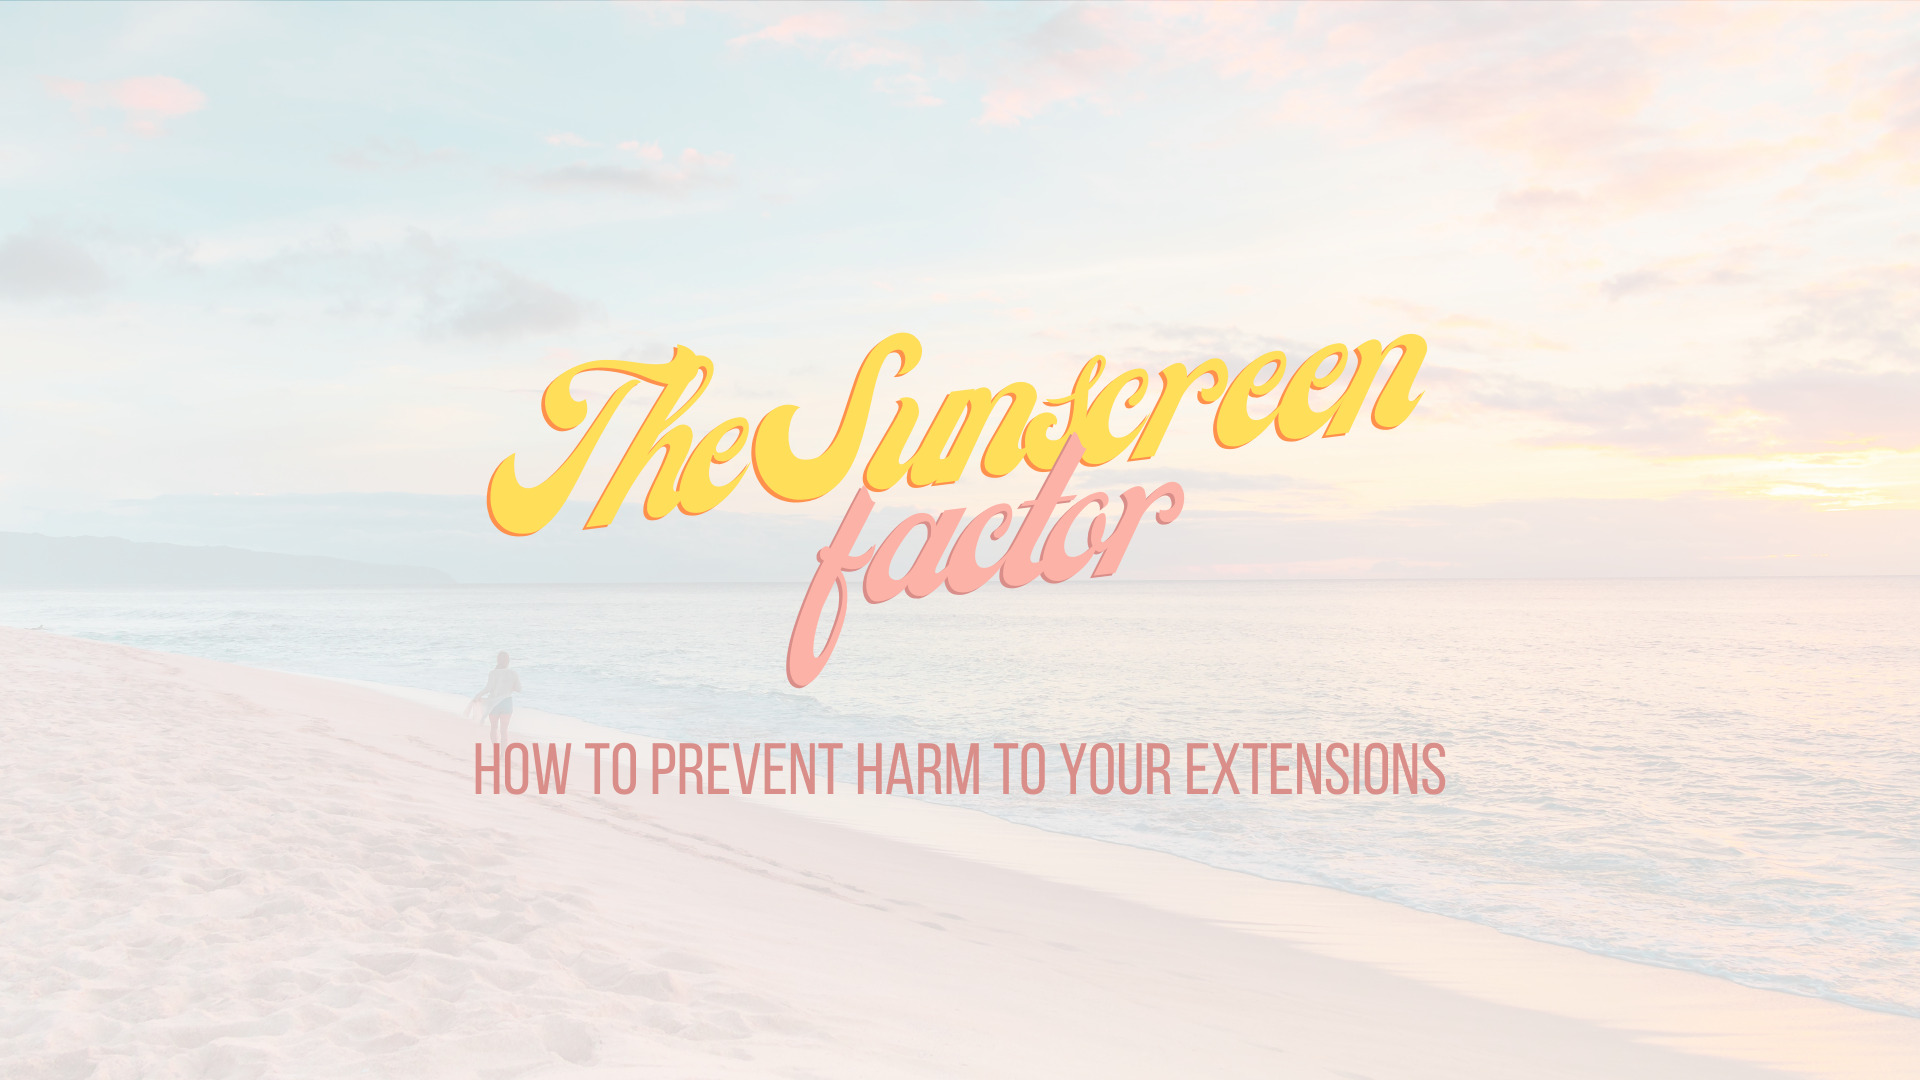 The Sunscreen factor, how to prevent harm to your extensions